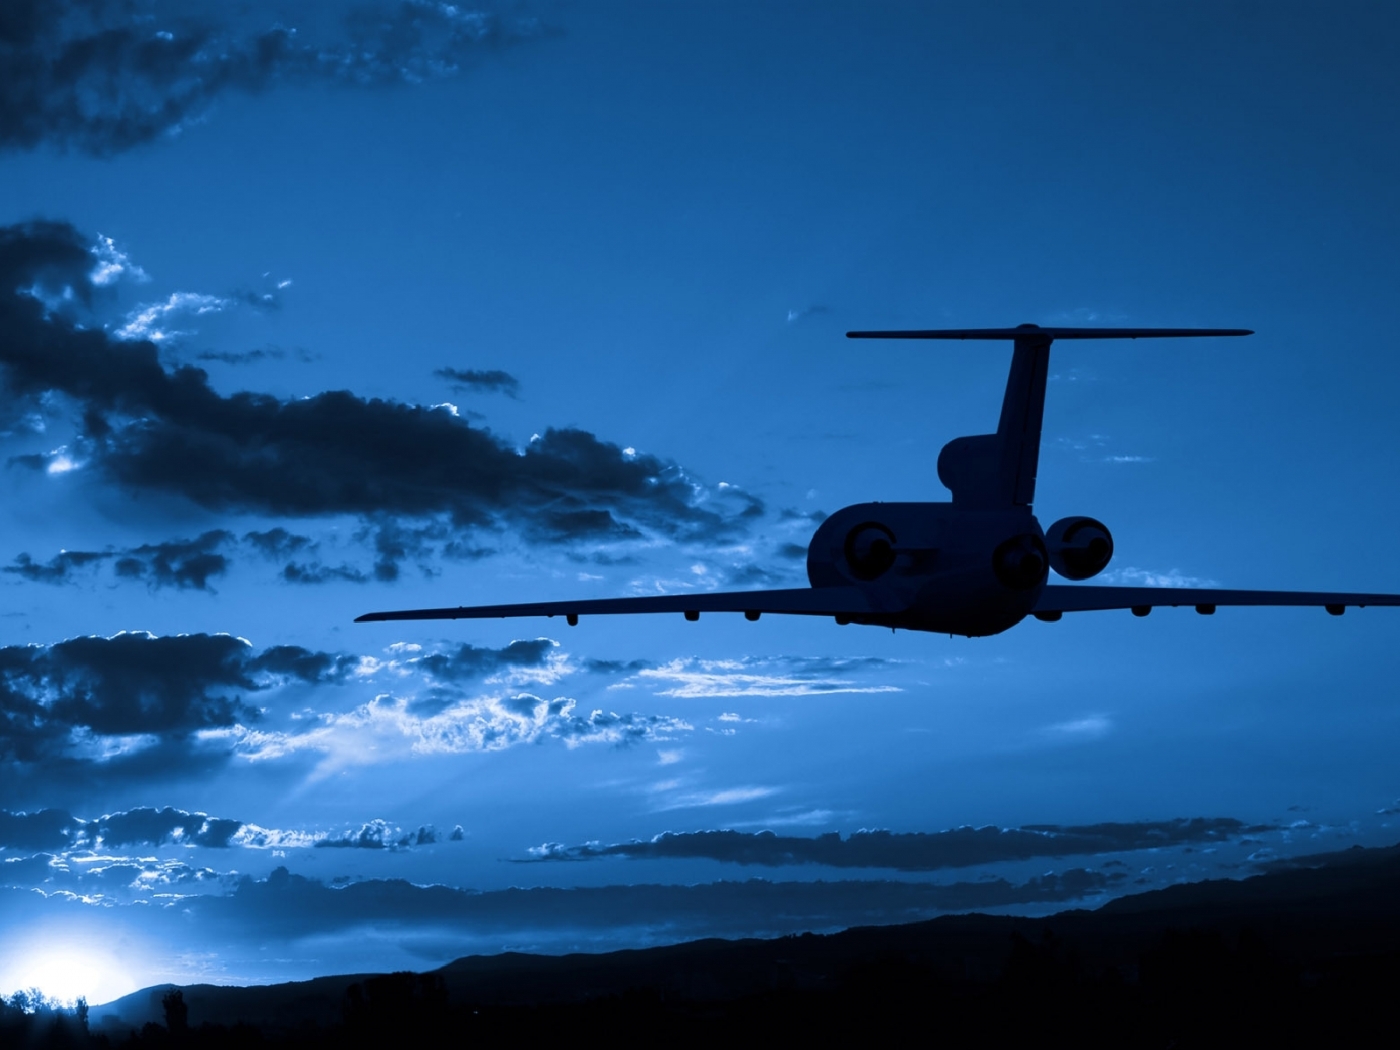 Windows Backgrounds transport, sky, clouds, airplanes, blue